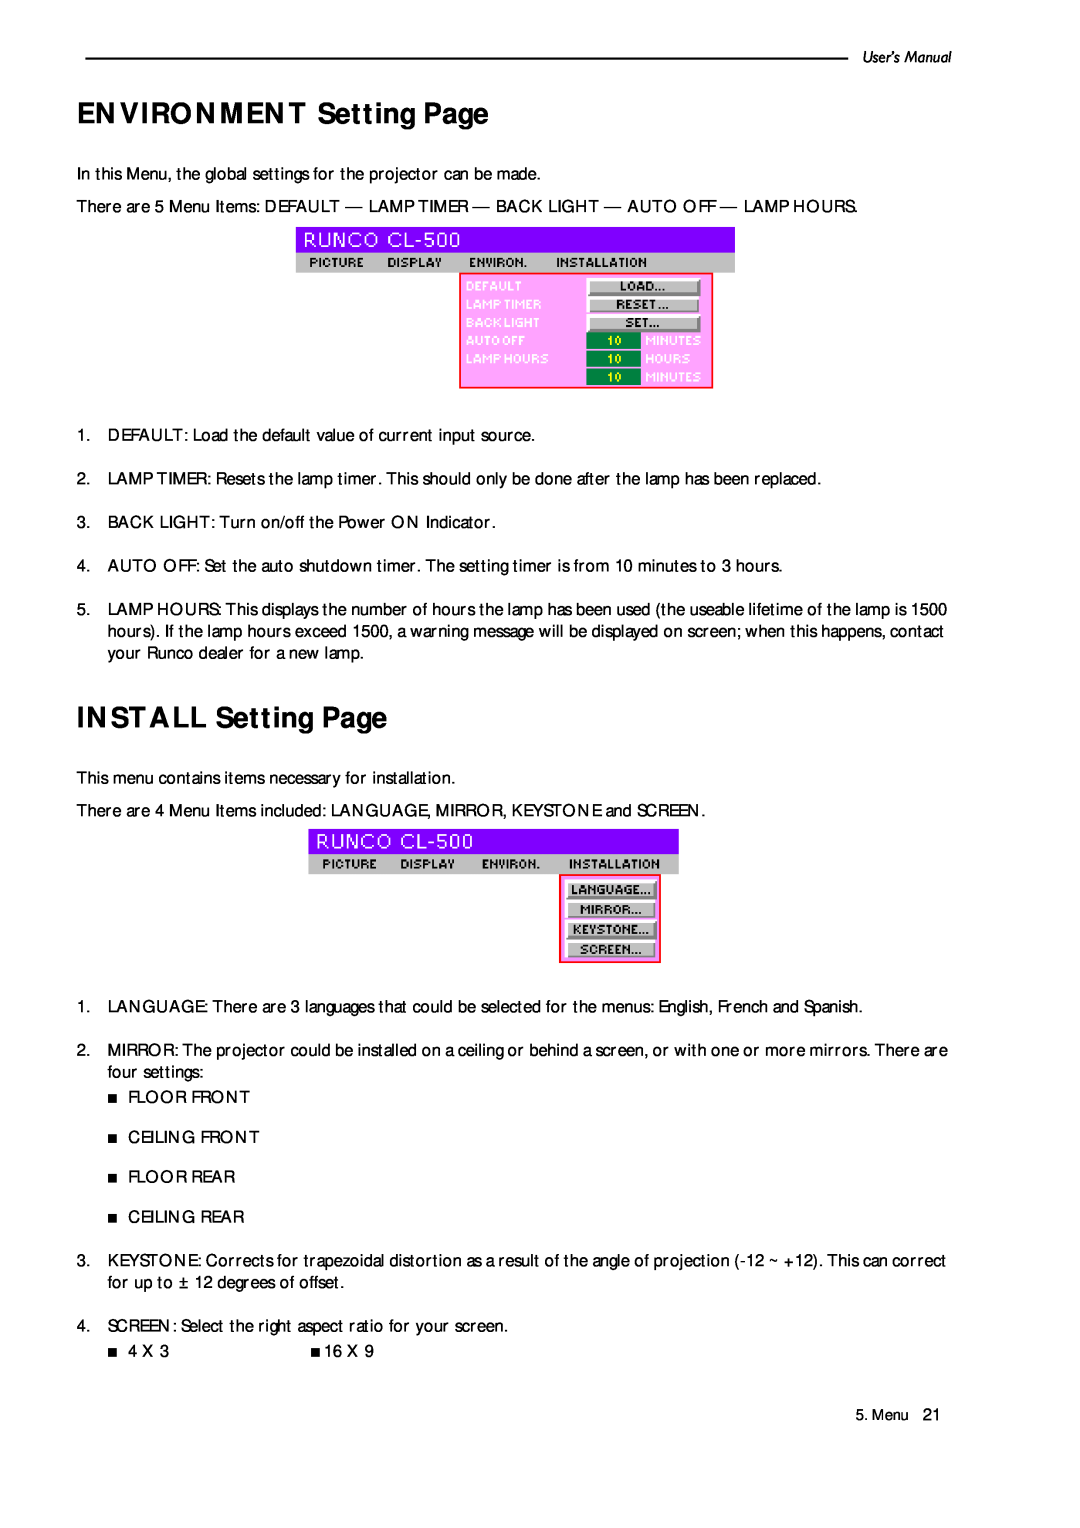 Runco CL-500 manual ENVIRONMENT Setting Page, INSTALL Setting Page 